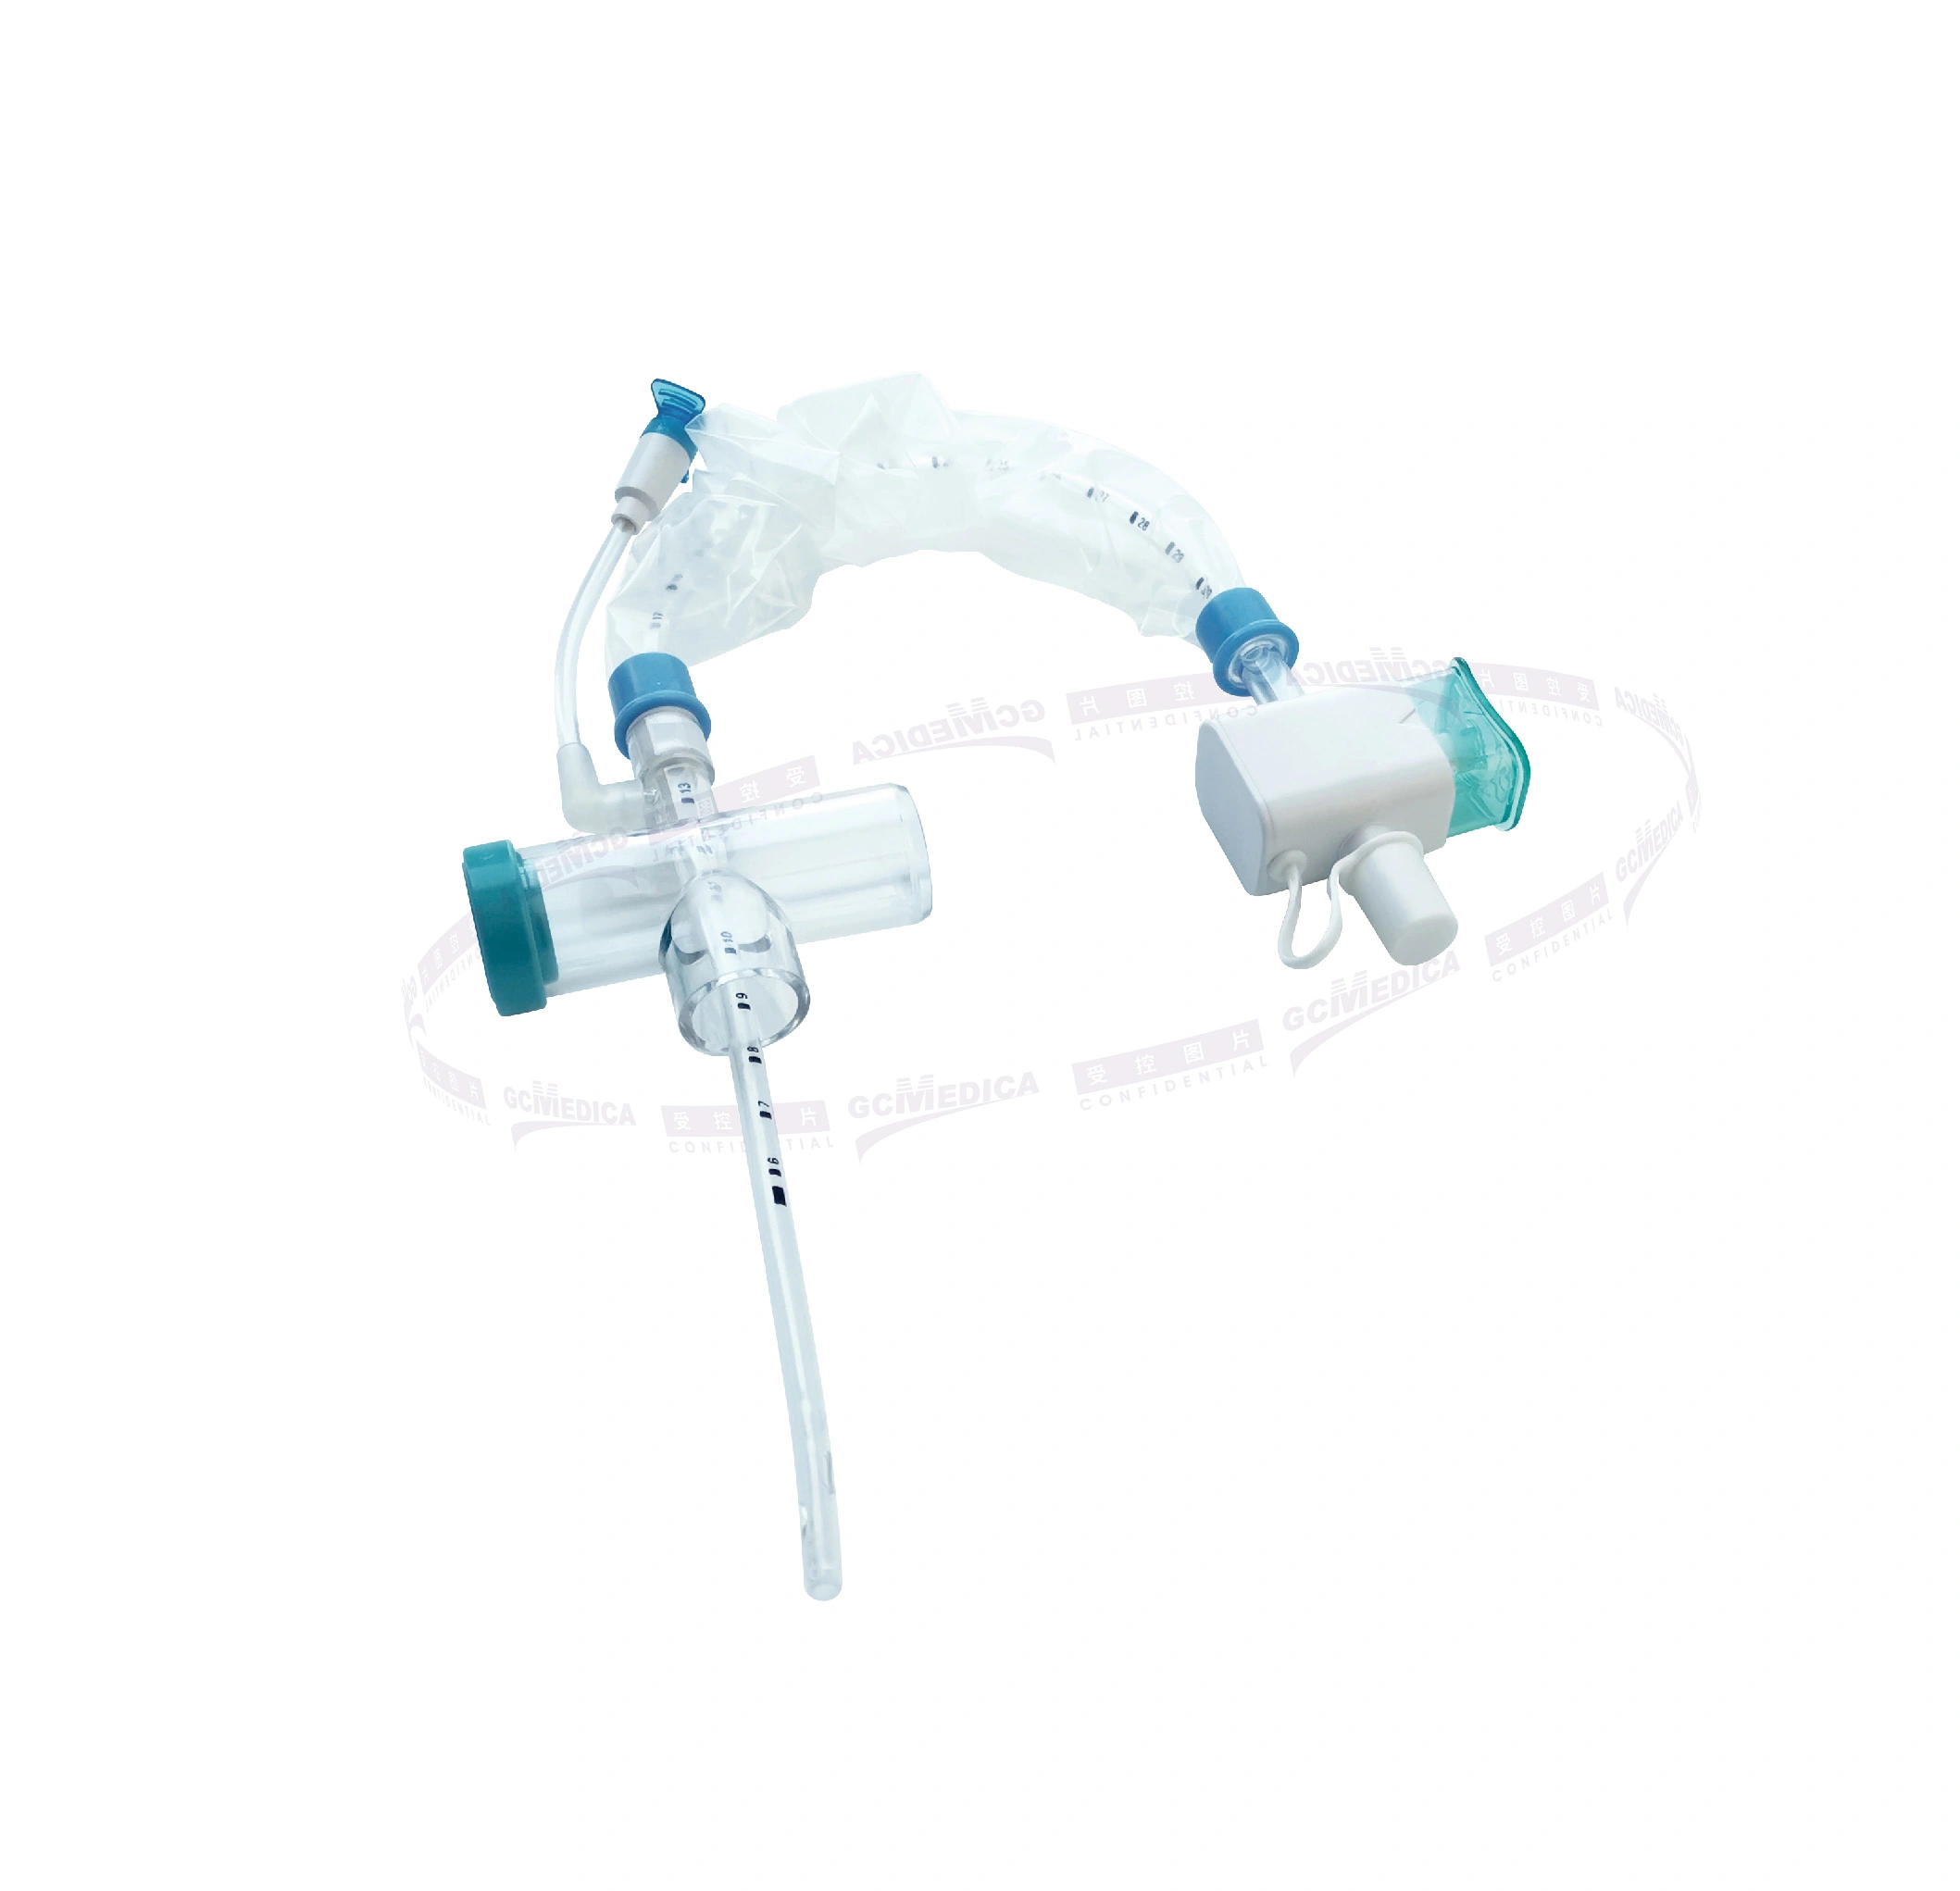 24H B-type Trach T-piece Closed Suction Catheter